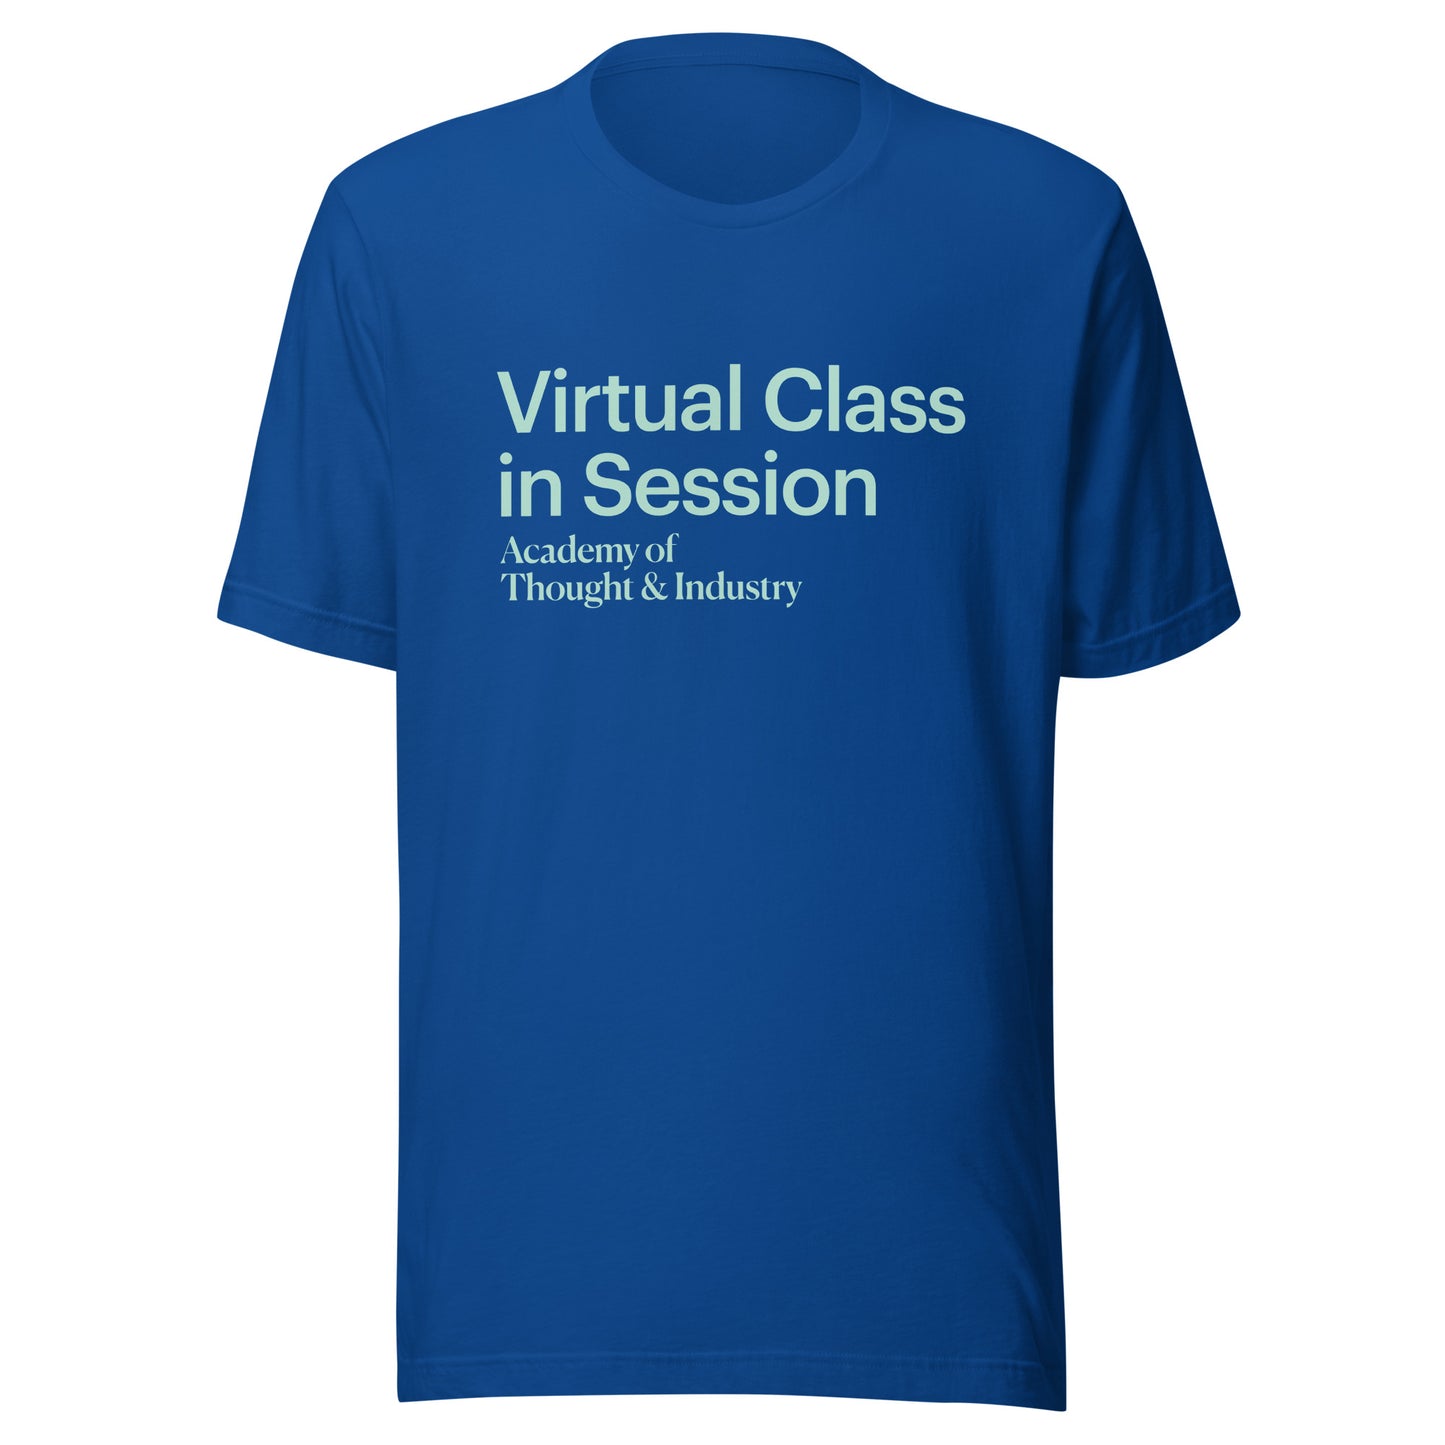 Virtual Class in Session Adult t-shirt